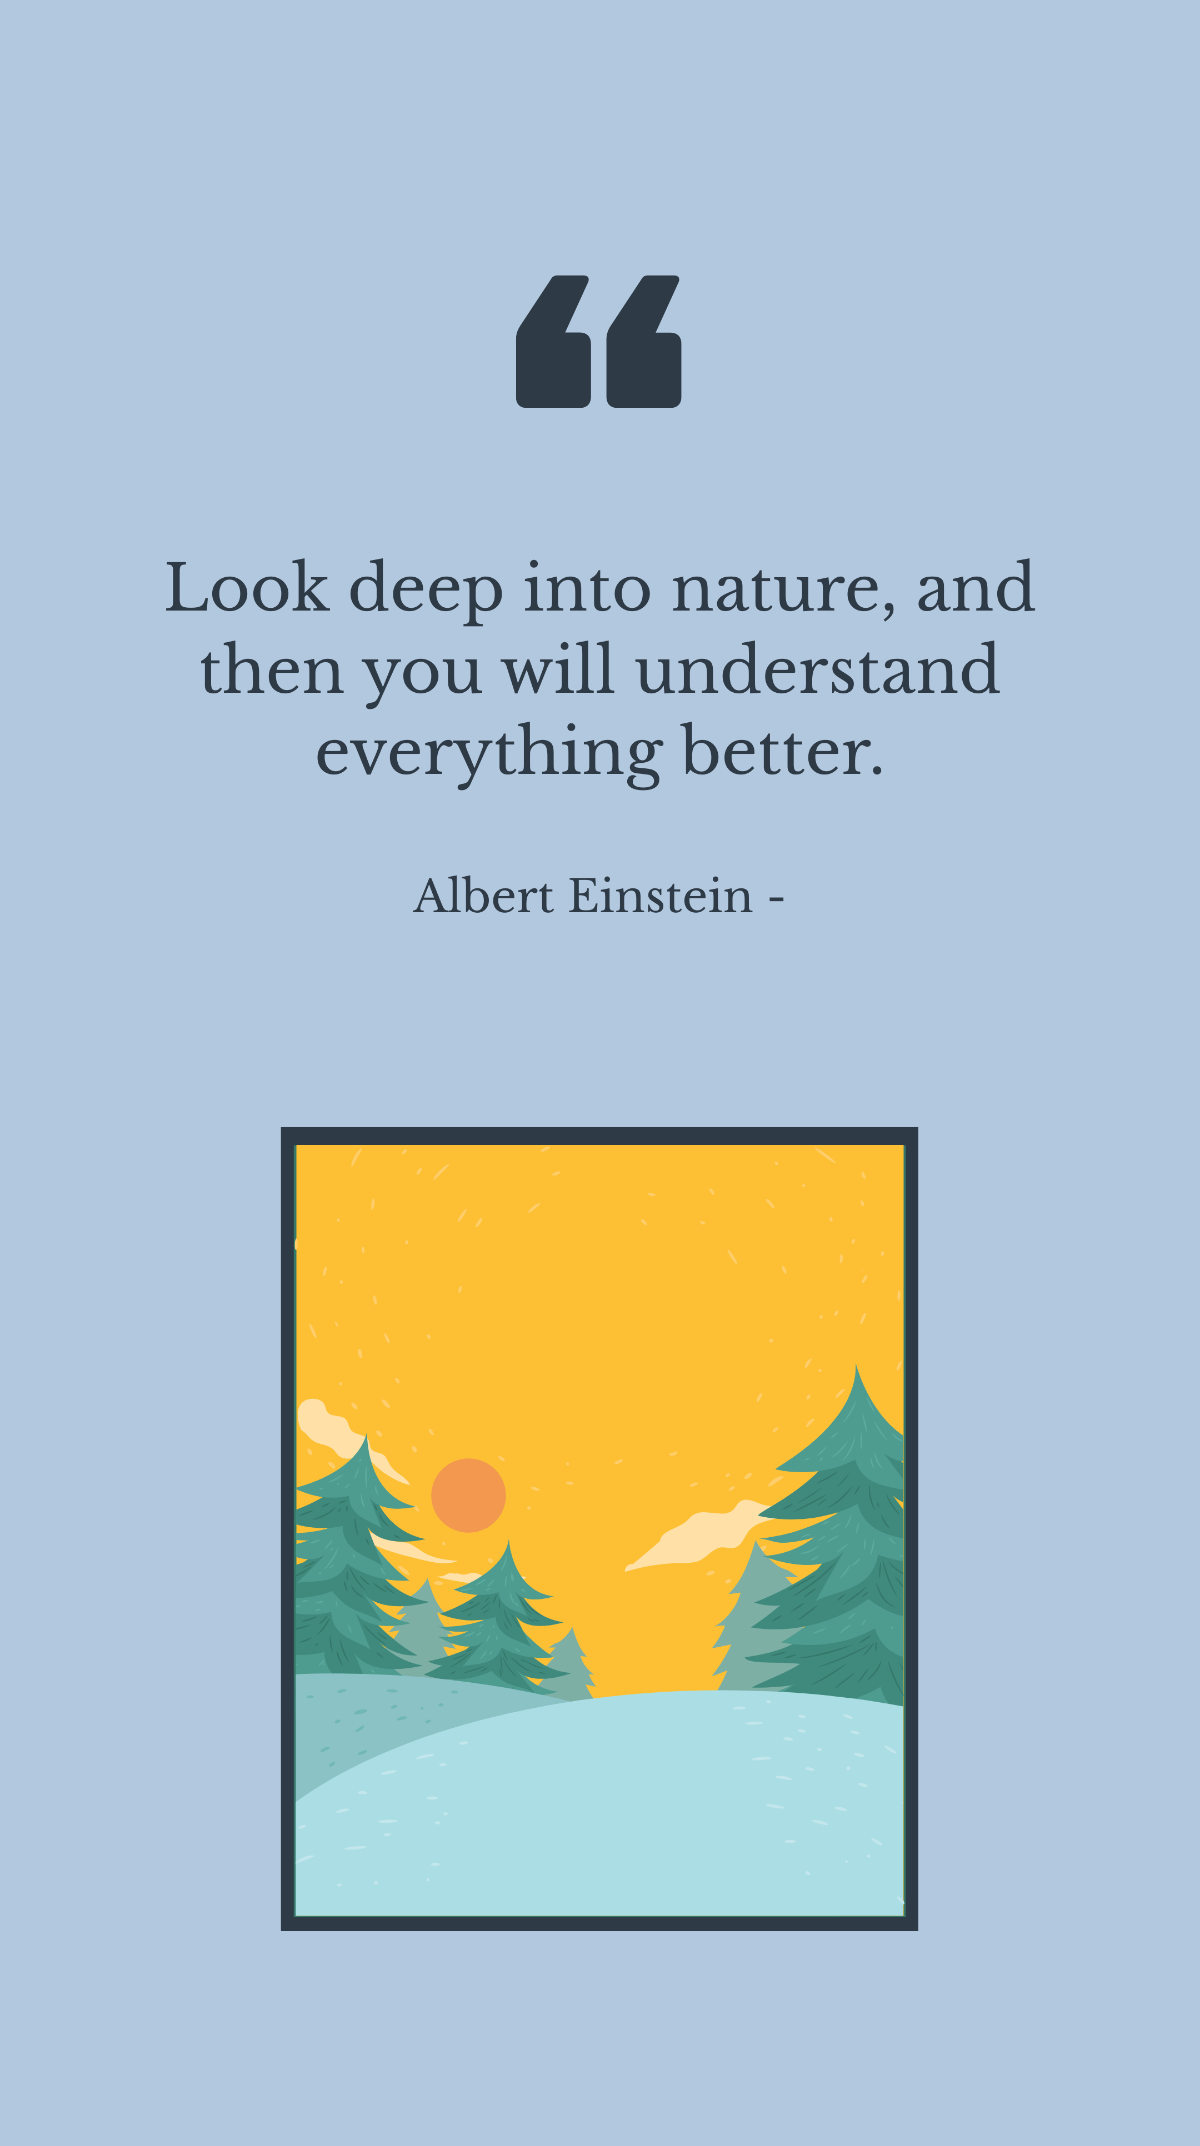 Albert Einstein - Look deep into nature, and then you will understand everything better. Template